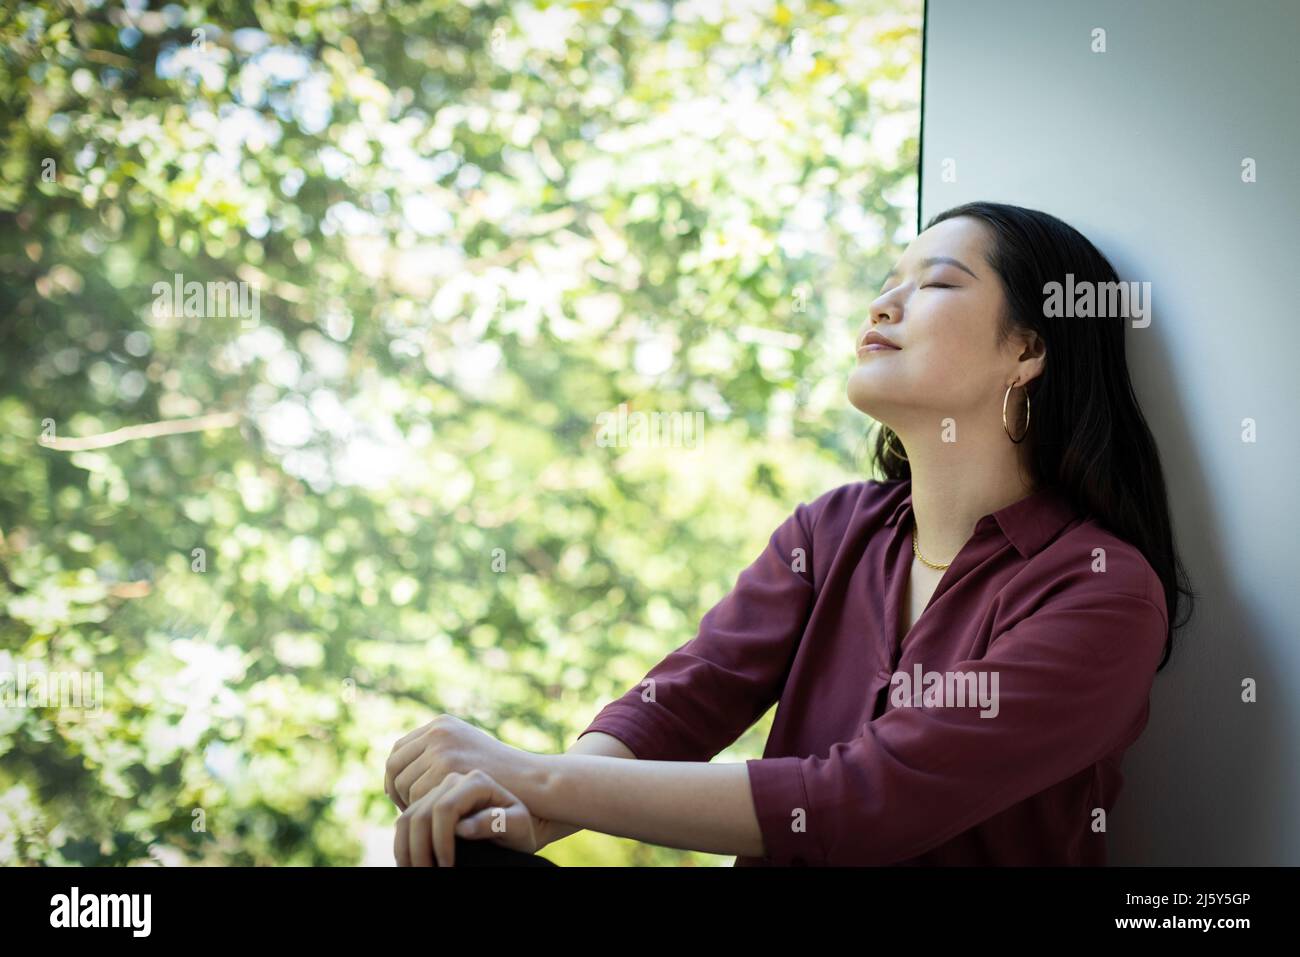 Serene young woman relaxing at window with view of green tree Stock Photo